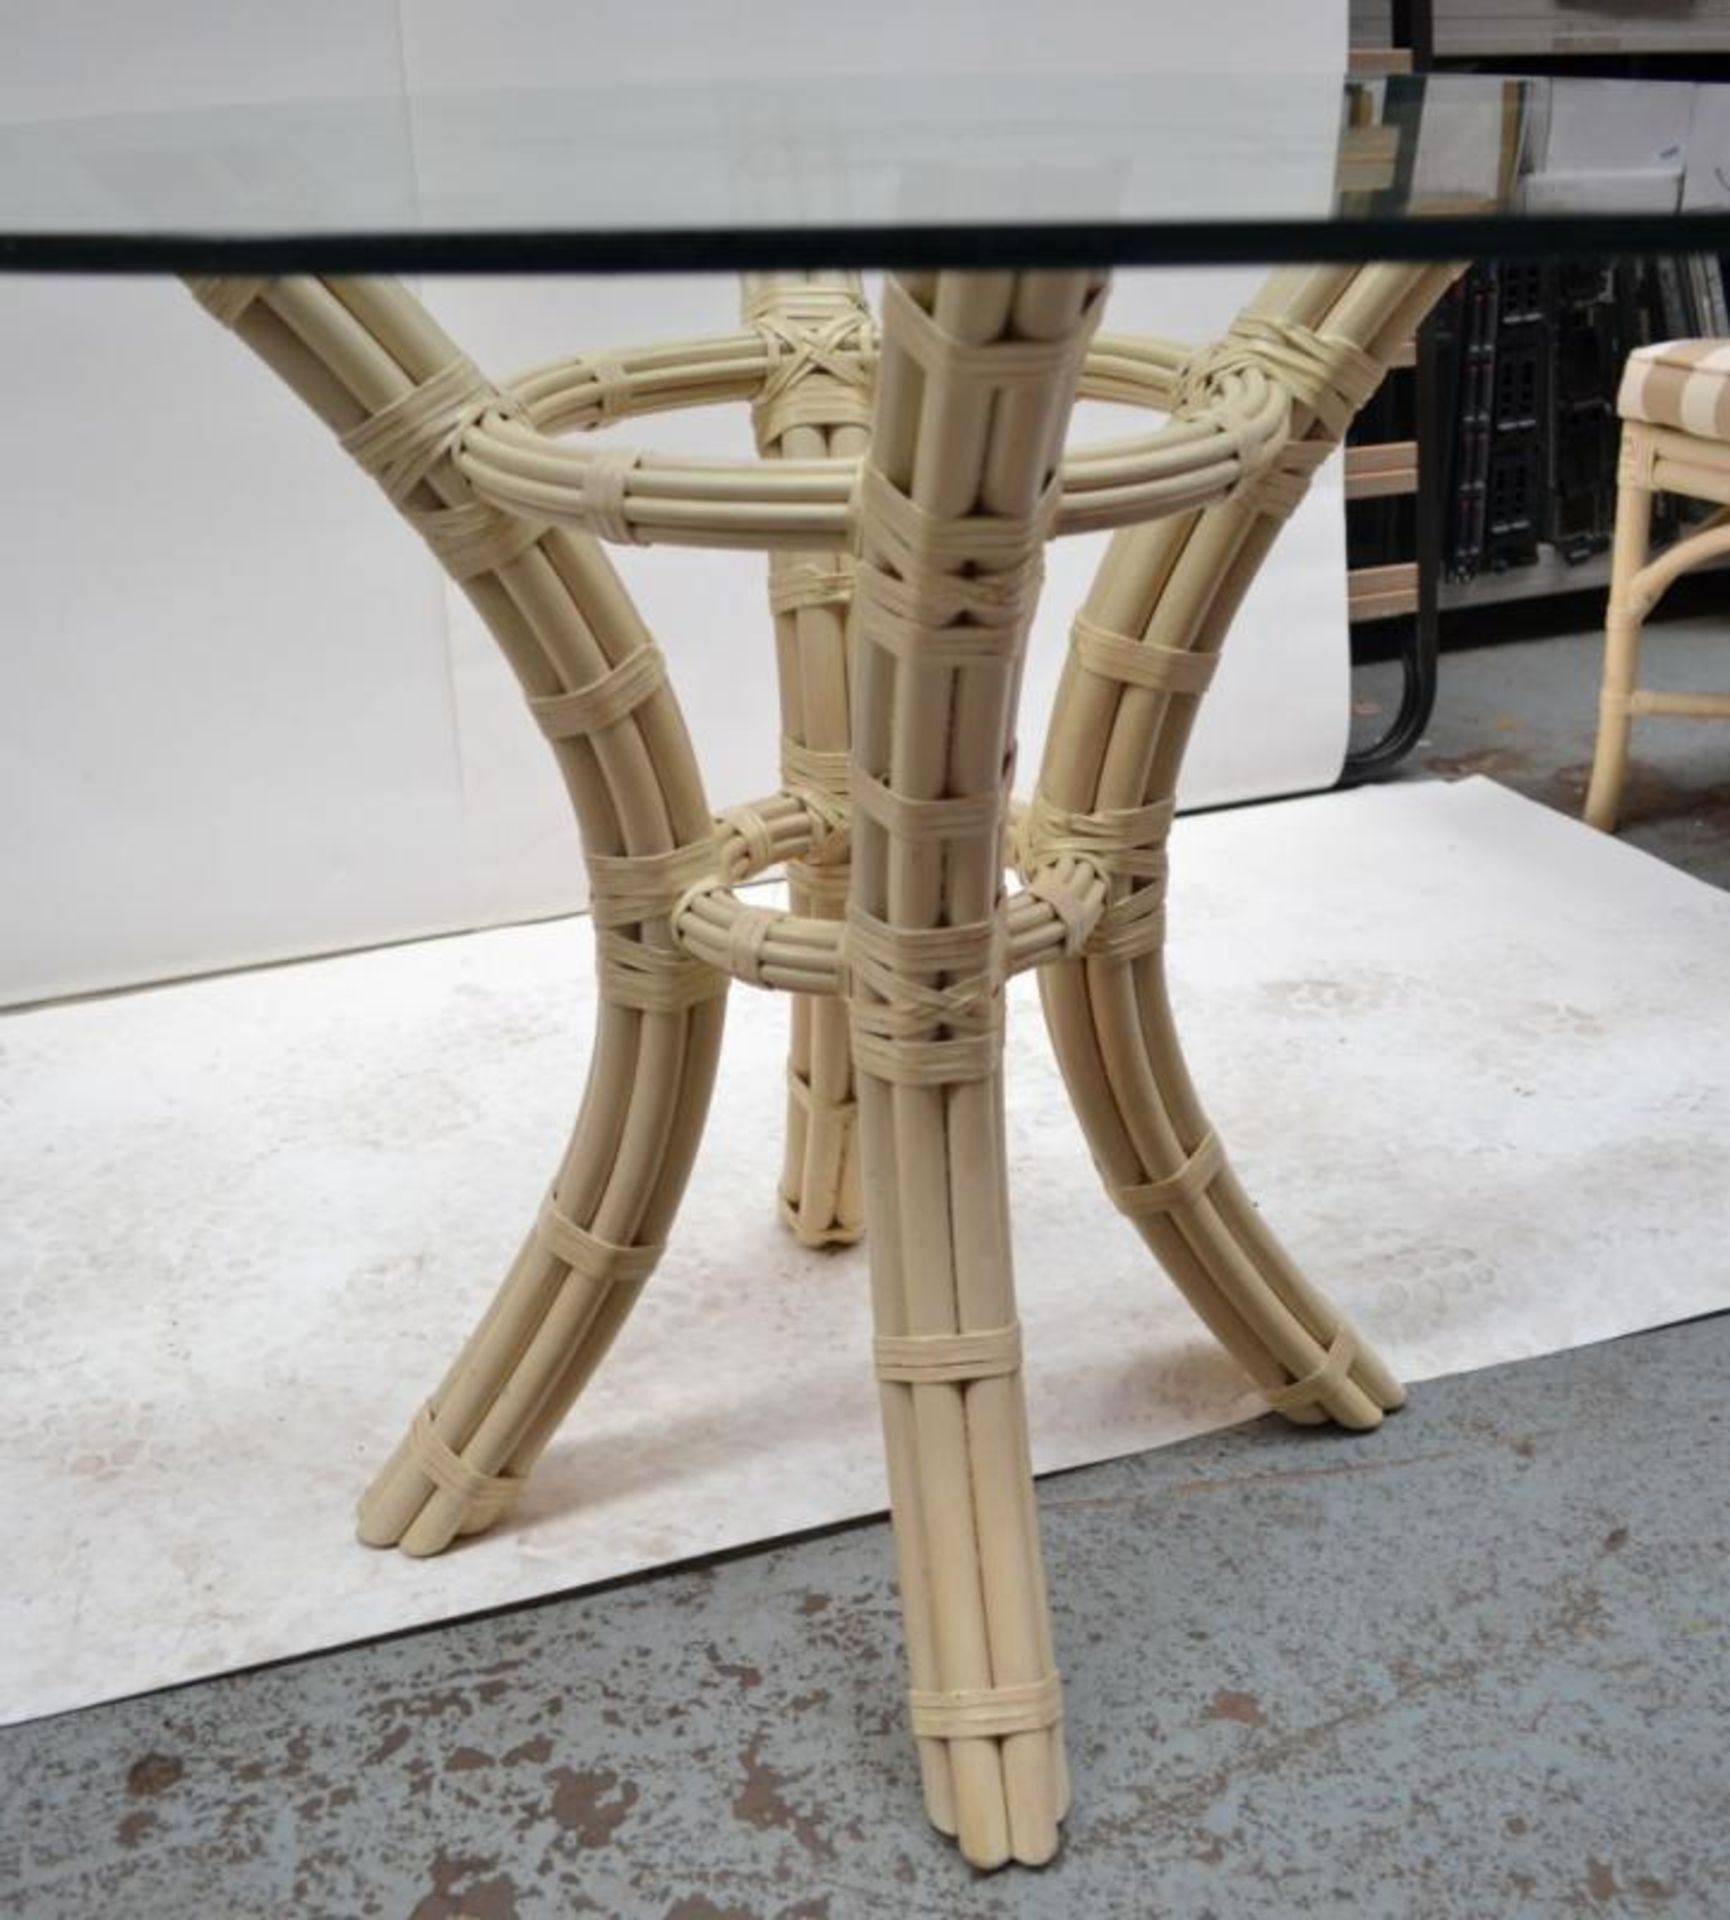 1 x Glass Topped Cane Table with 4 Chairs - Pre-owned In Good Condition - AE010 - CL007 - - Image 11 of 13